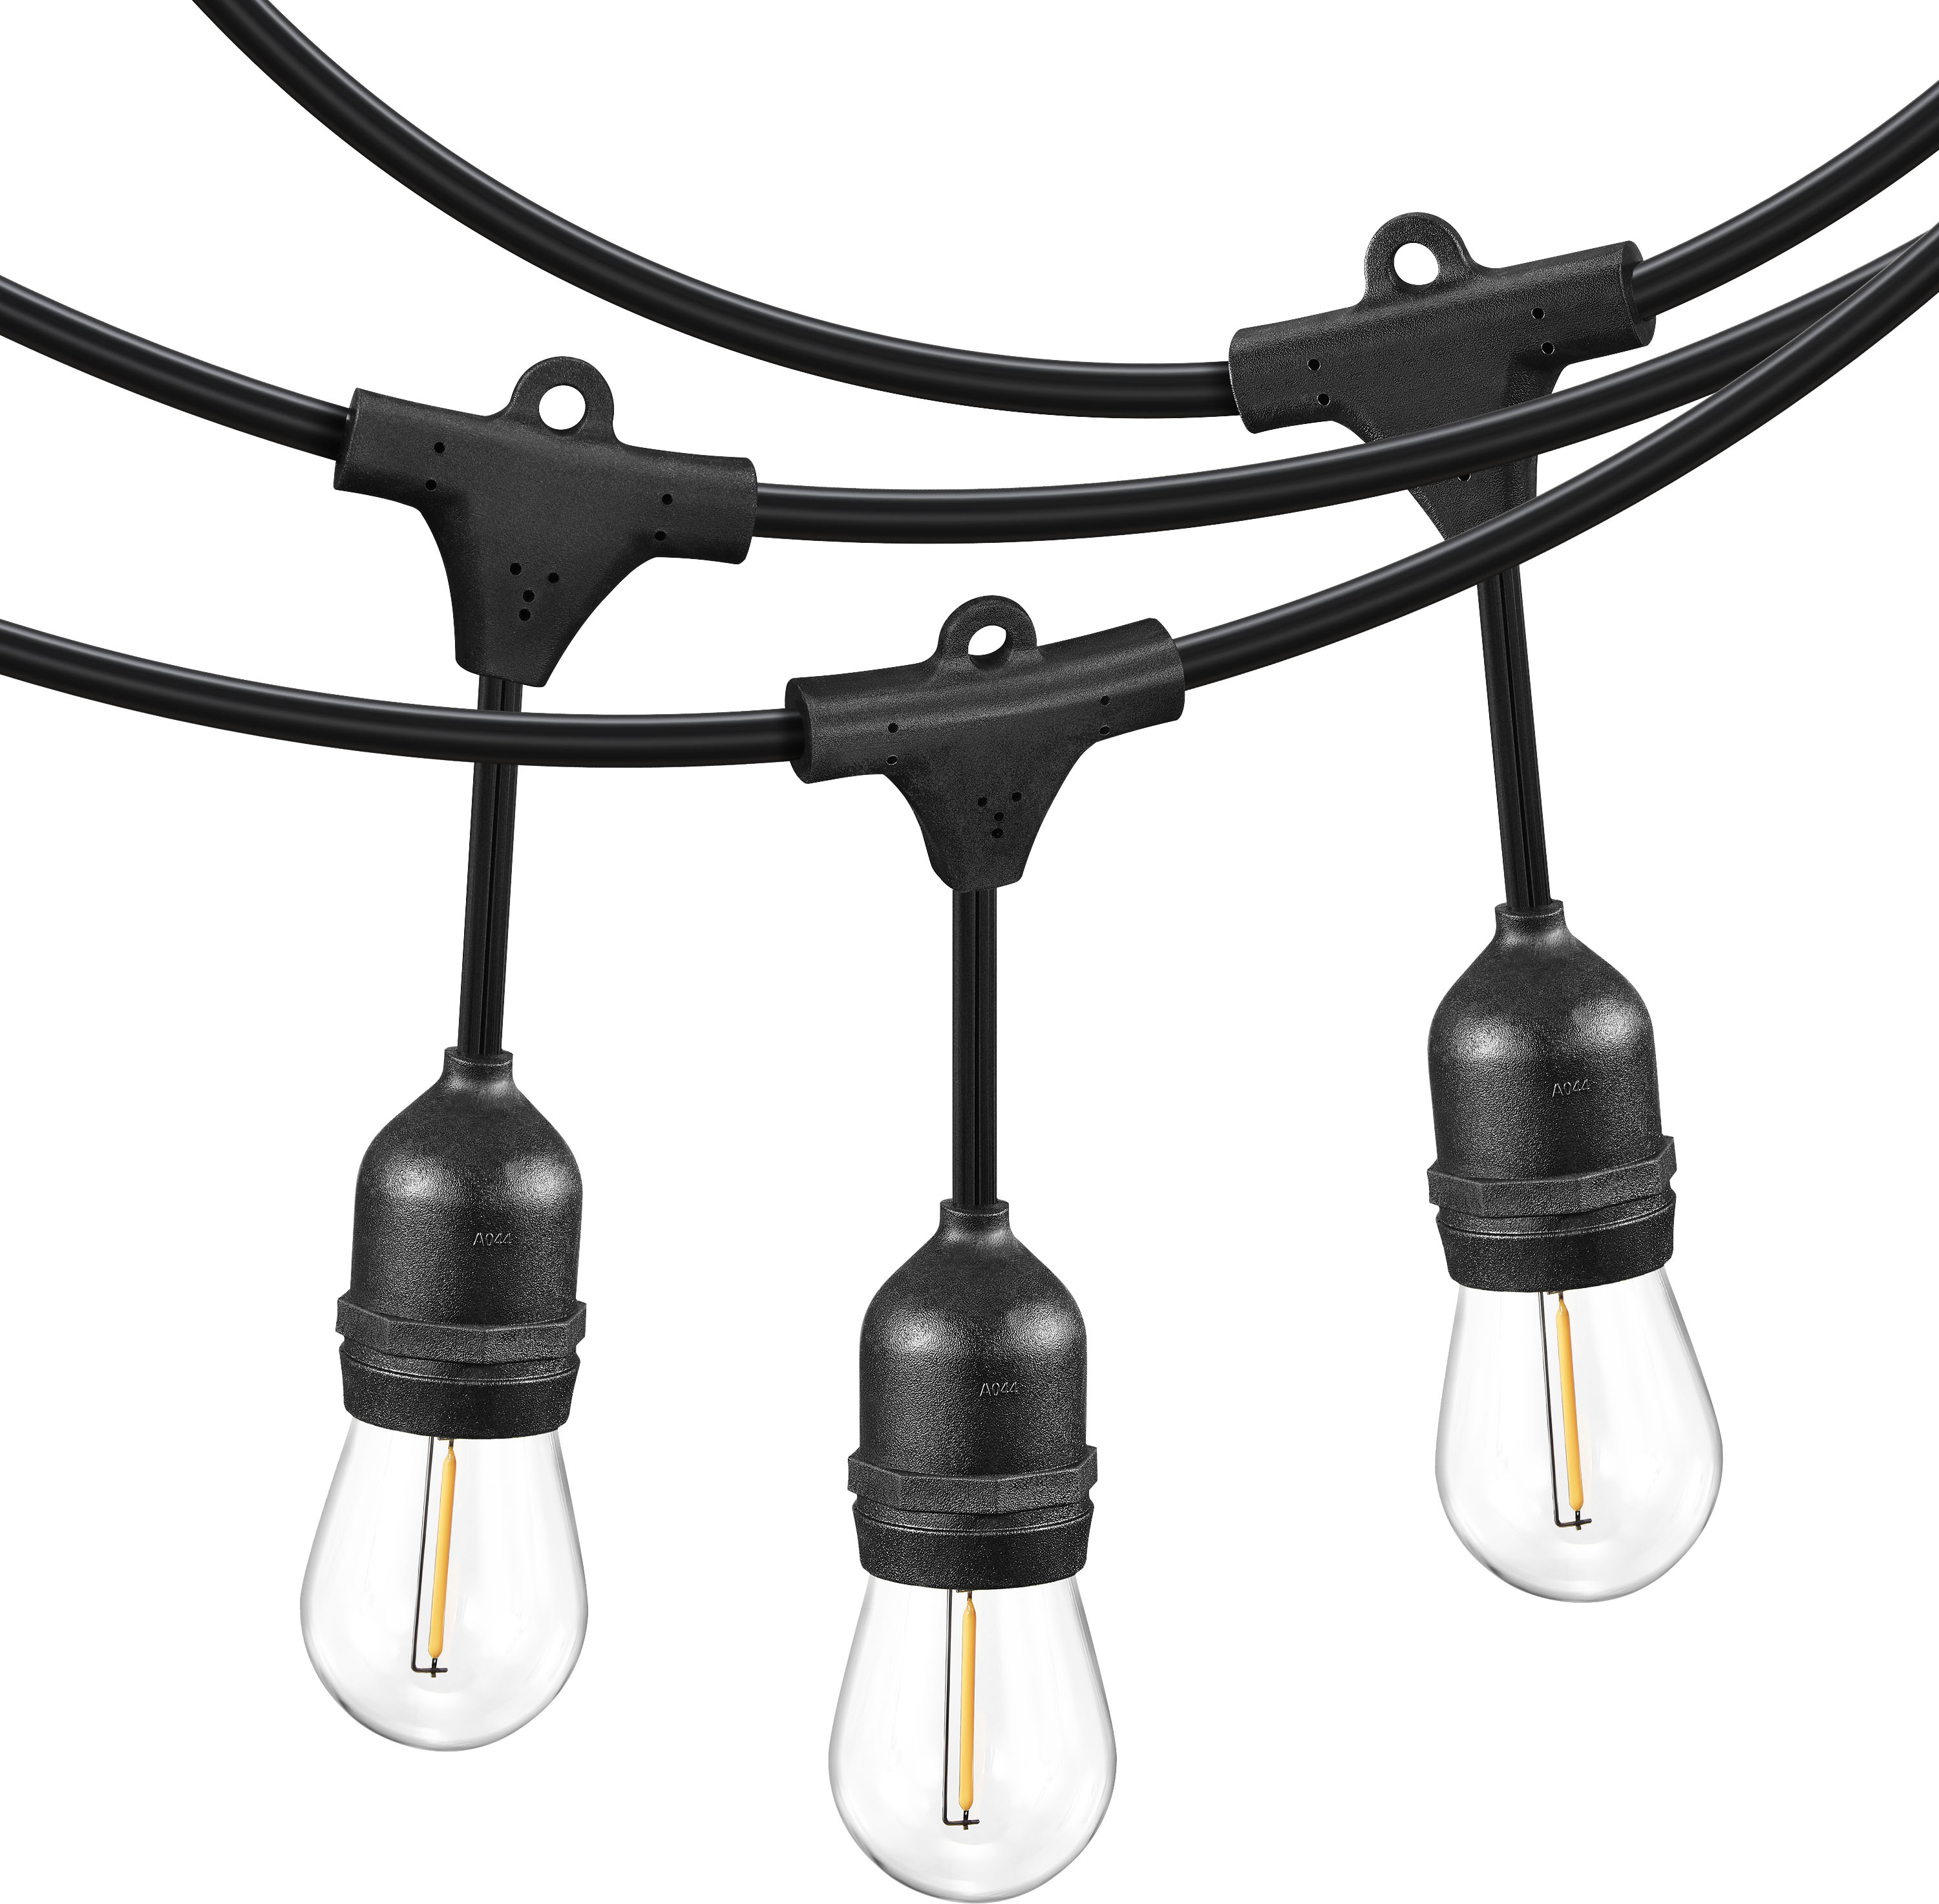 Enbrighten 24-ft Plug-in Black Indoor/Outdoor String Light with 12 Color  Changing-Light LED Edison Bulbs Bluetooth Compatibility Wi-fi Compatibility  in the String Lights department at